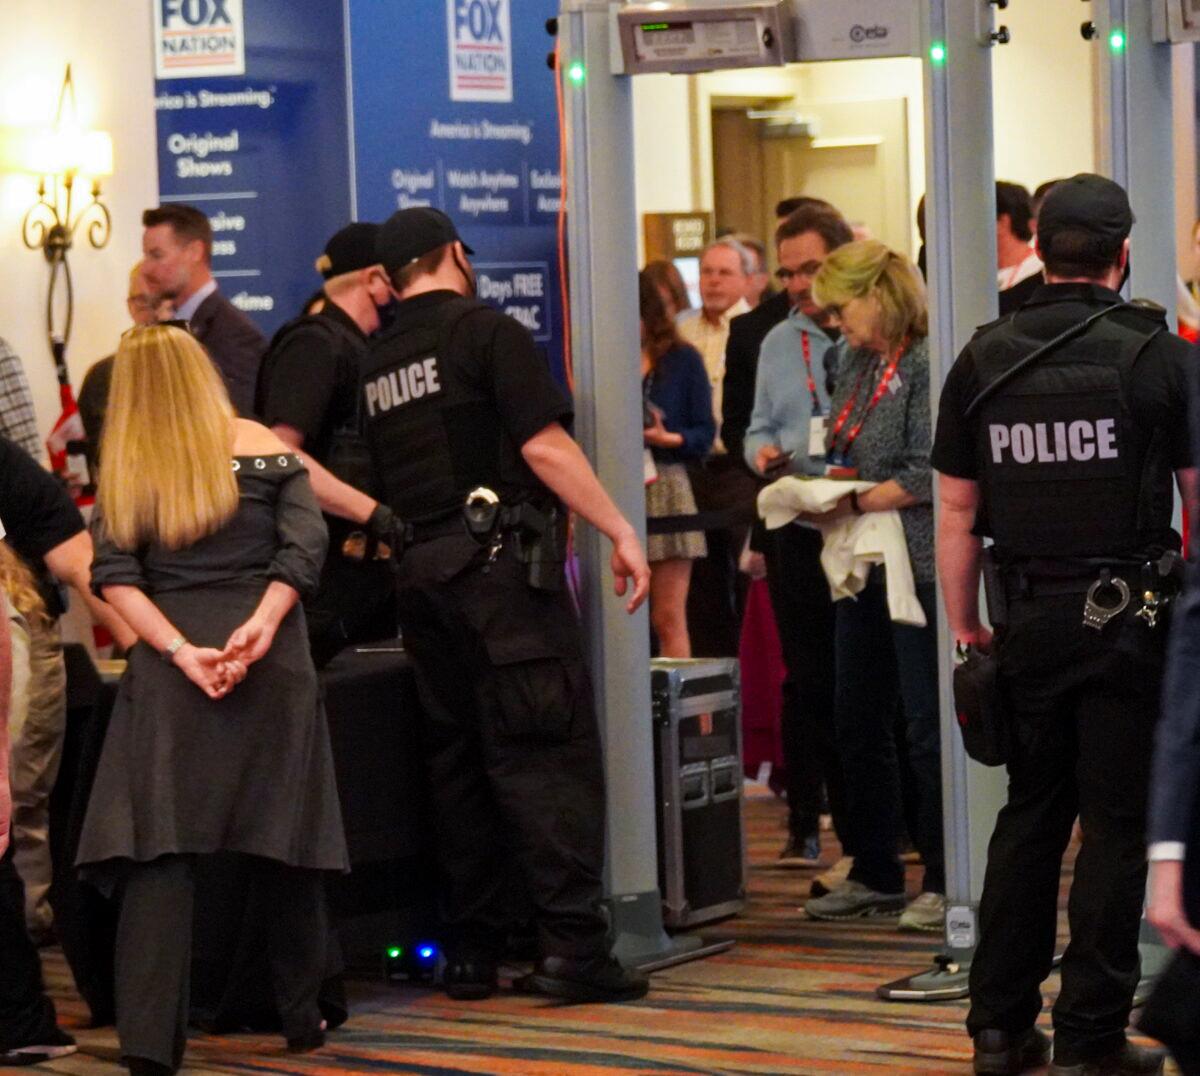 Former President Trump’s Anticipated Speech Sparks Excitement, Tight Security Checks at CPAC